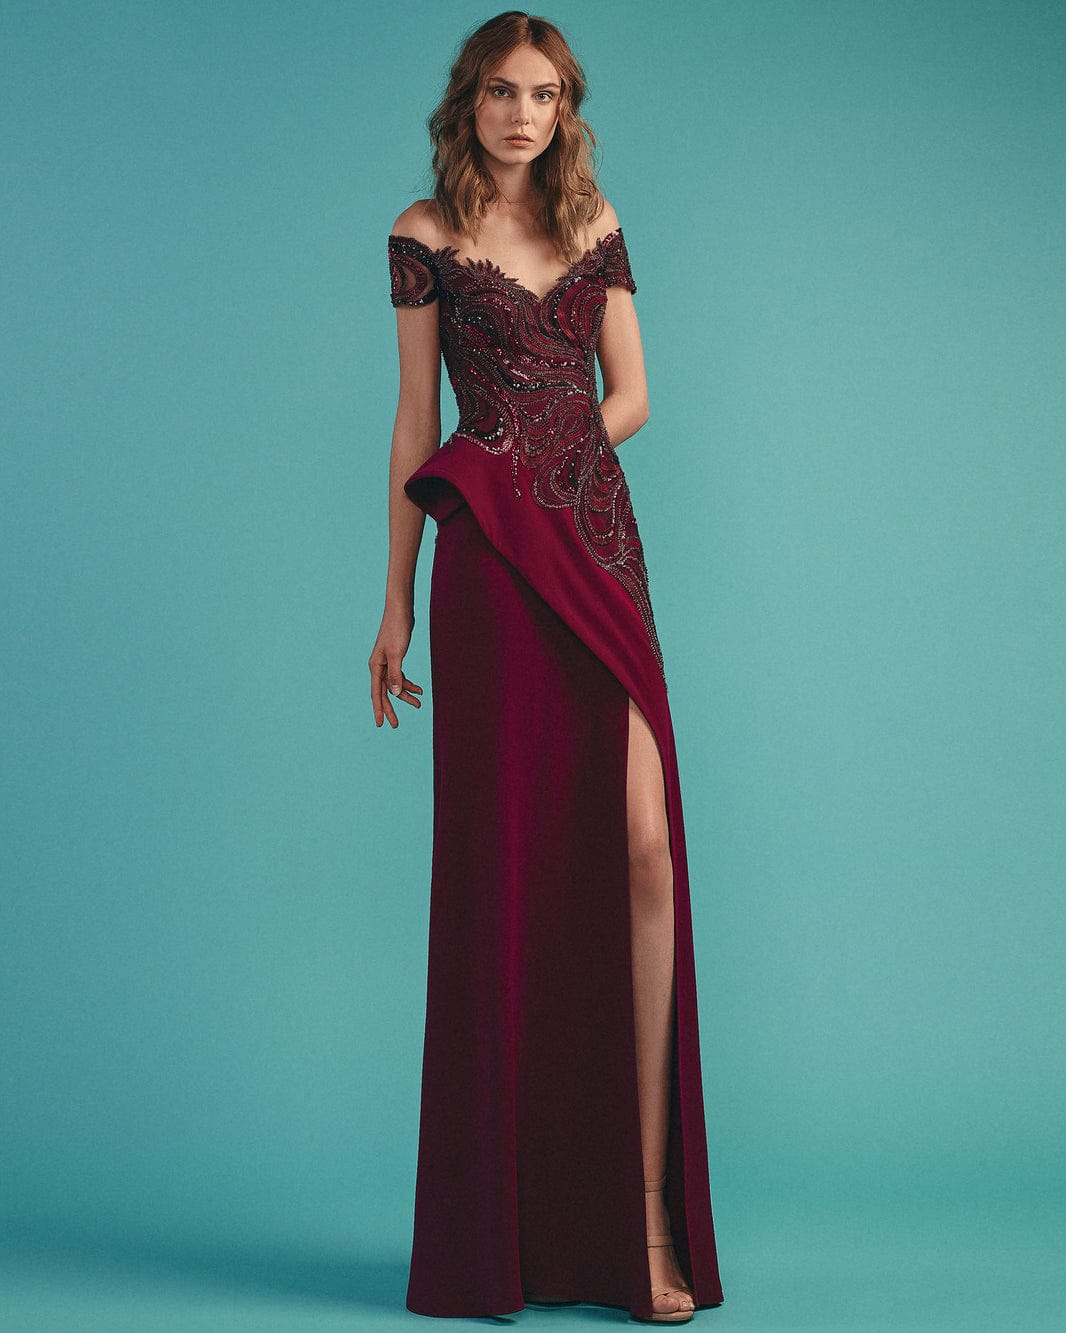 Gemy-Maalouf-BC1516-Embellished-Long-Dress-Purple-Glamorous-Off-Shoulder-Elegance-Front-View - Rofial Beauty